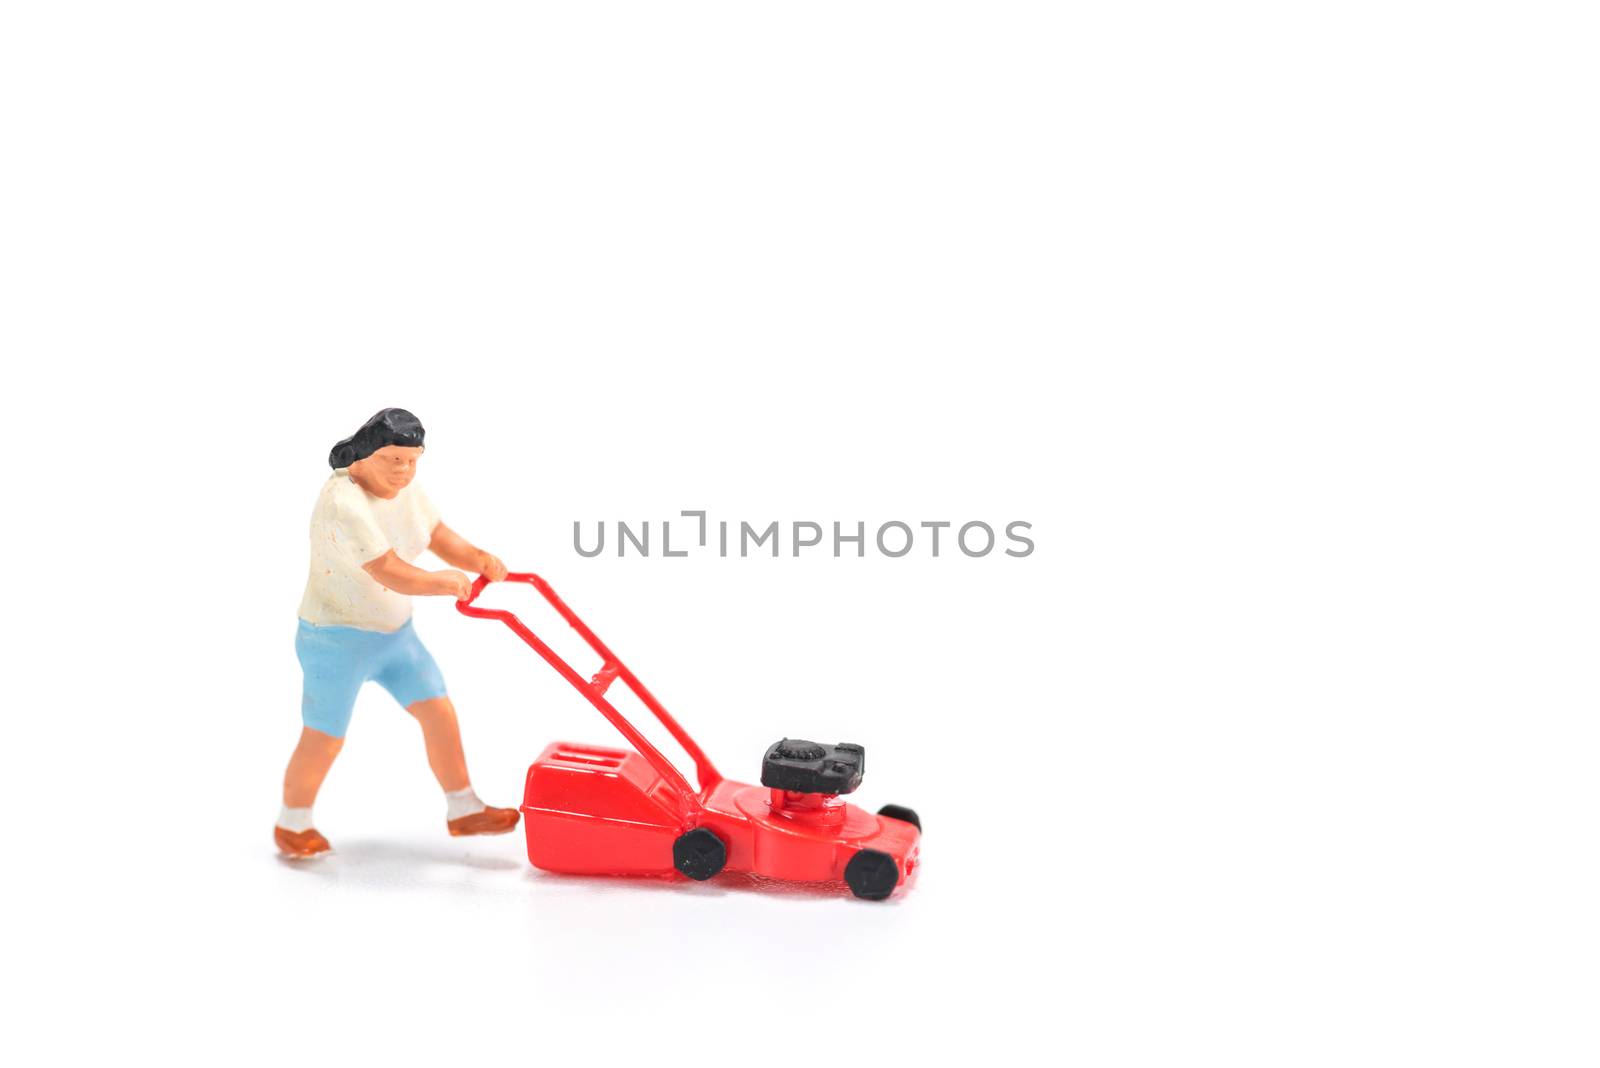 miniature people figure holding mower isolated on white background